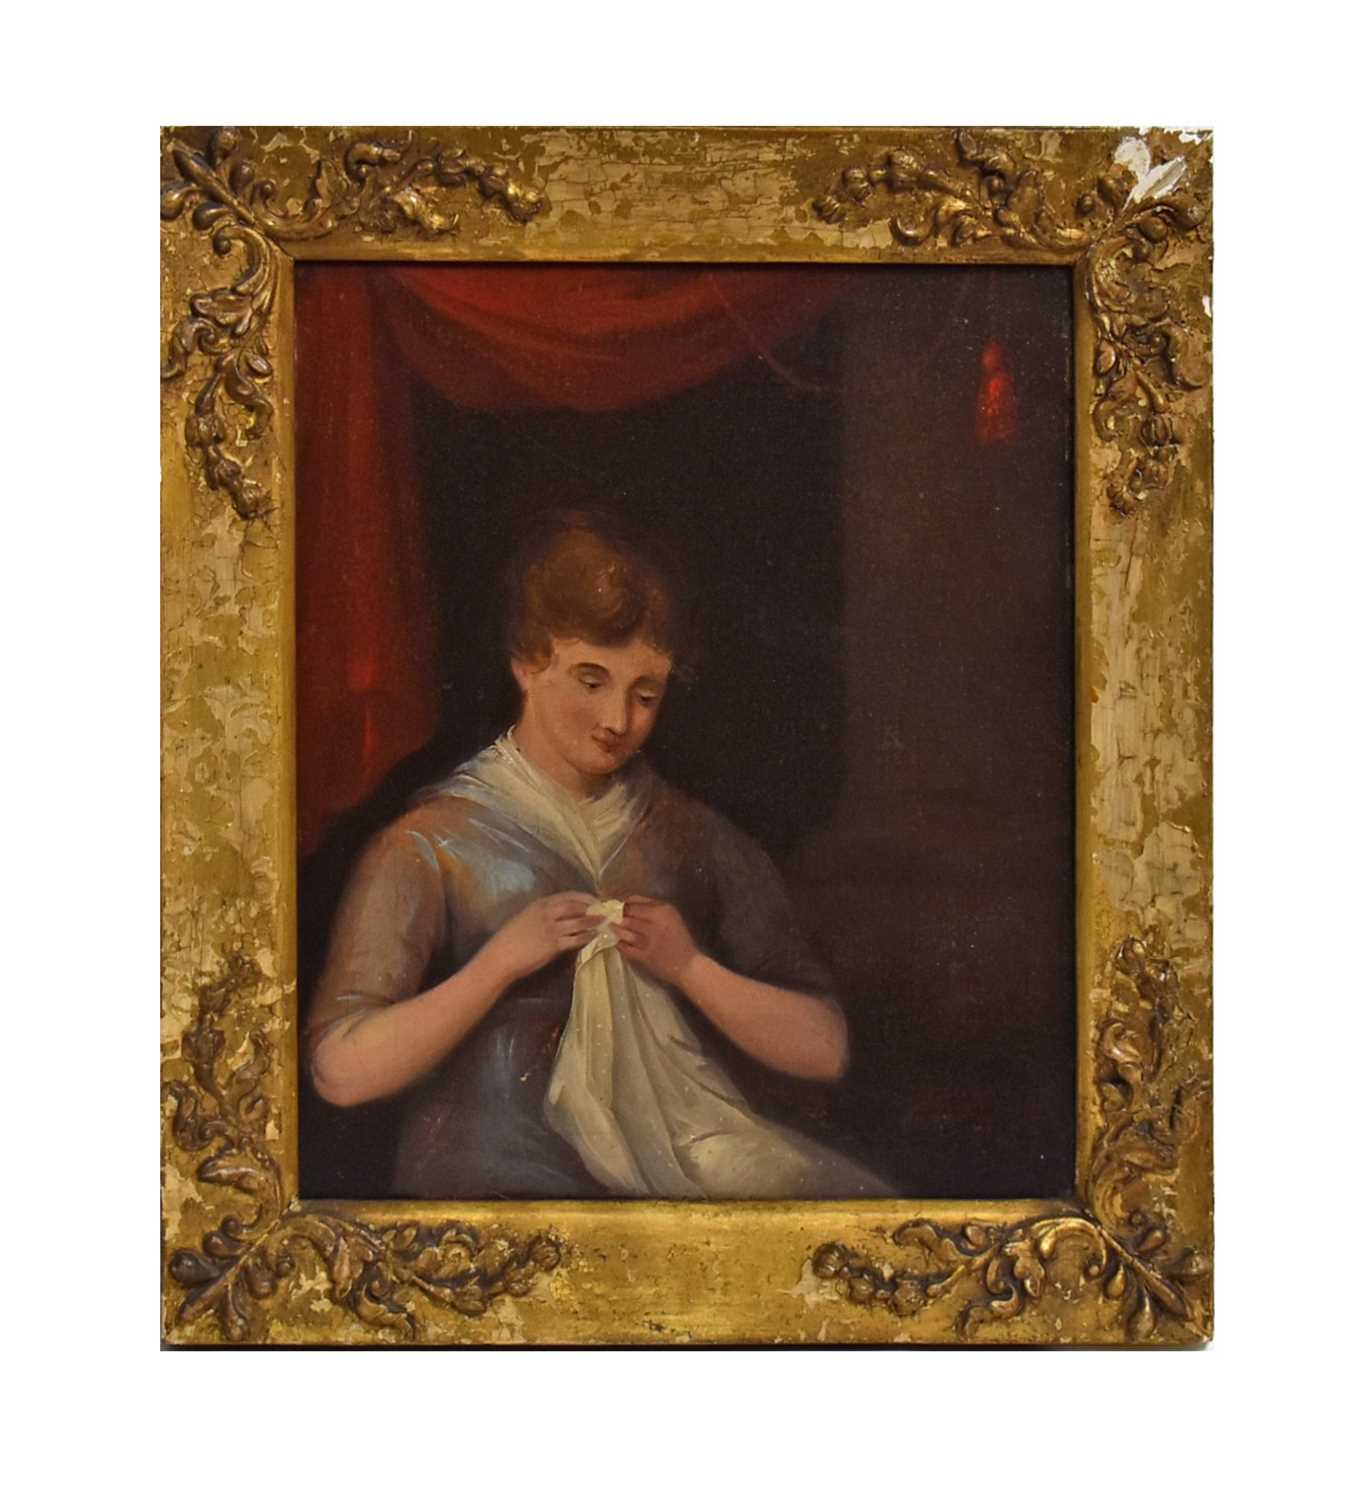 Lot 773 - 19th Century British School - Portrait of a Young Needlesmith | oil